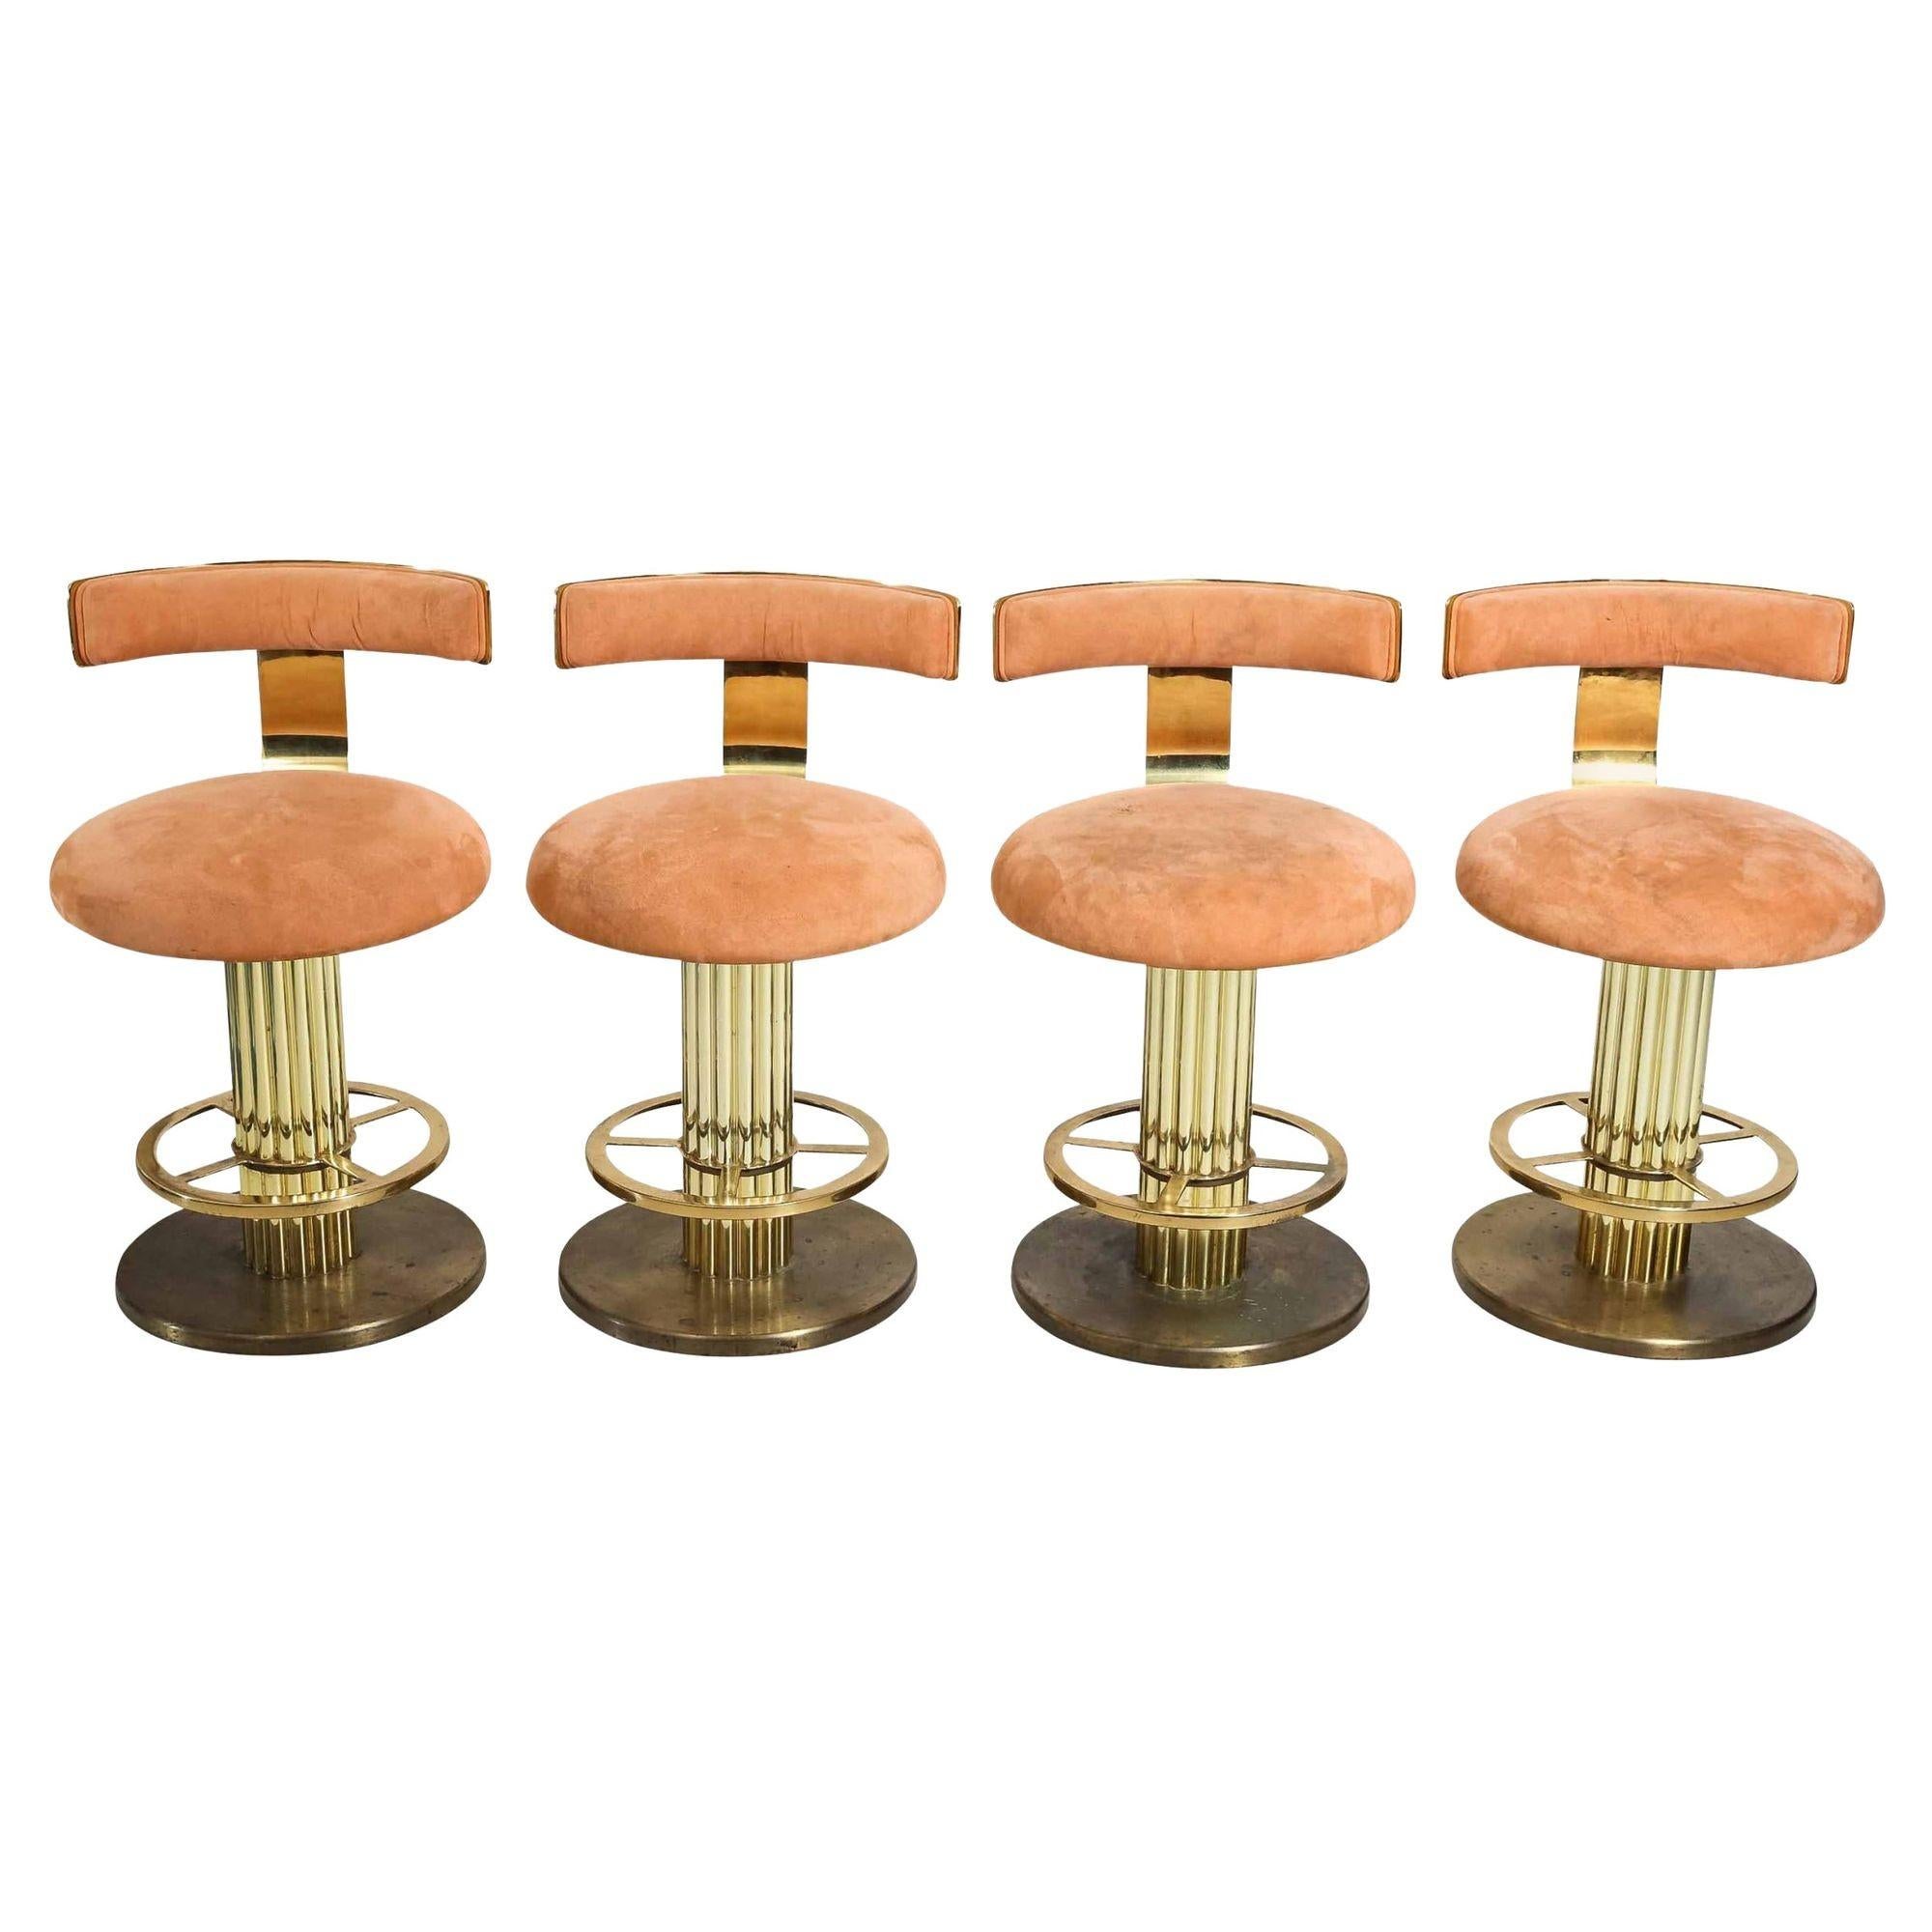 Design for Leisure Art Deco Revival Brass Counter Stools 4